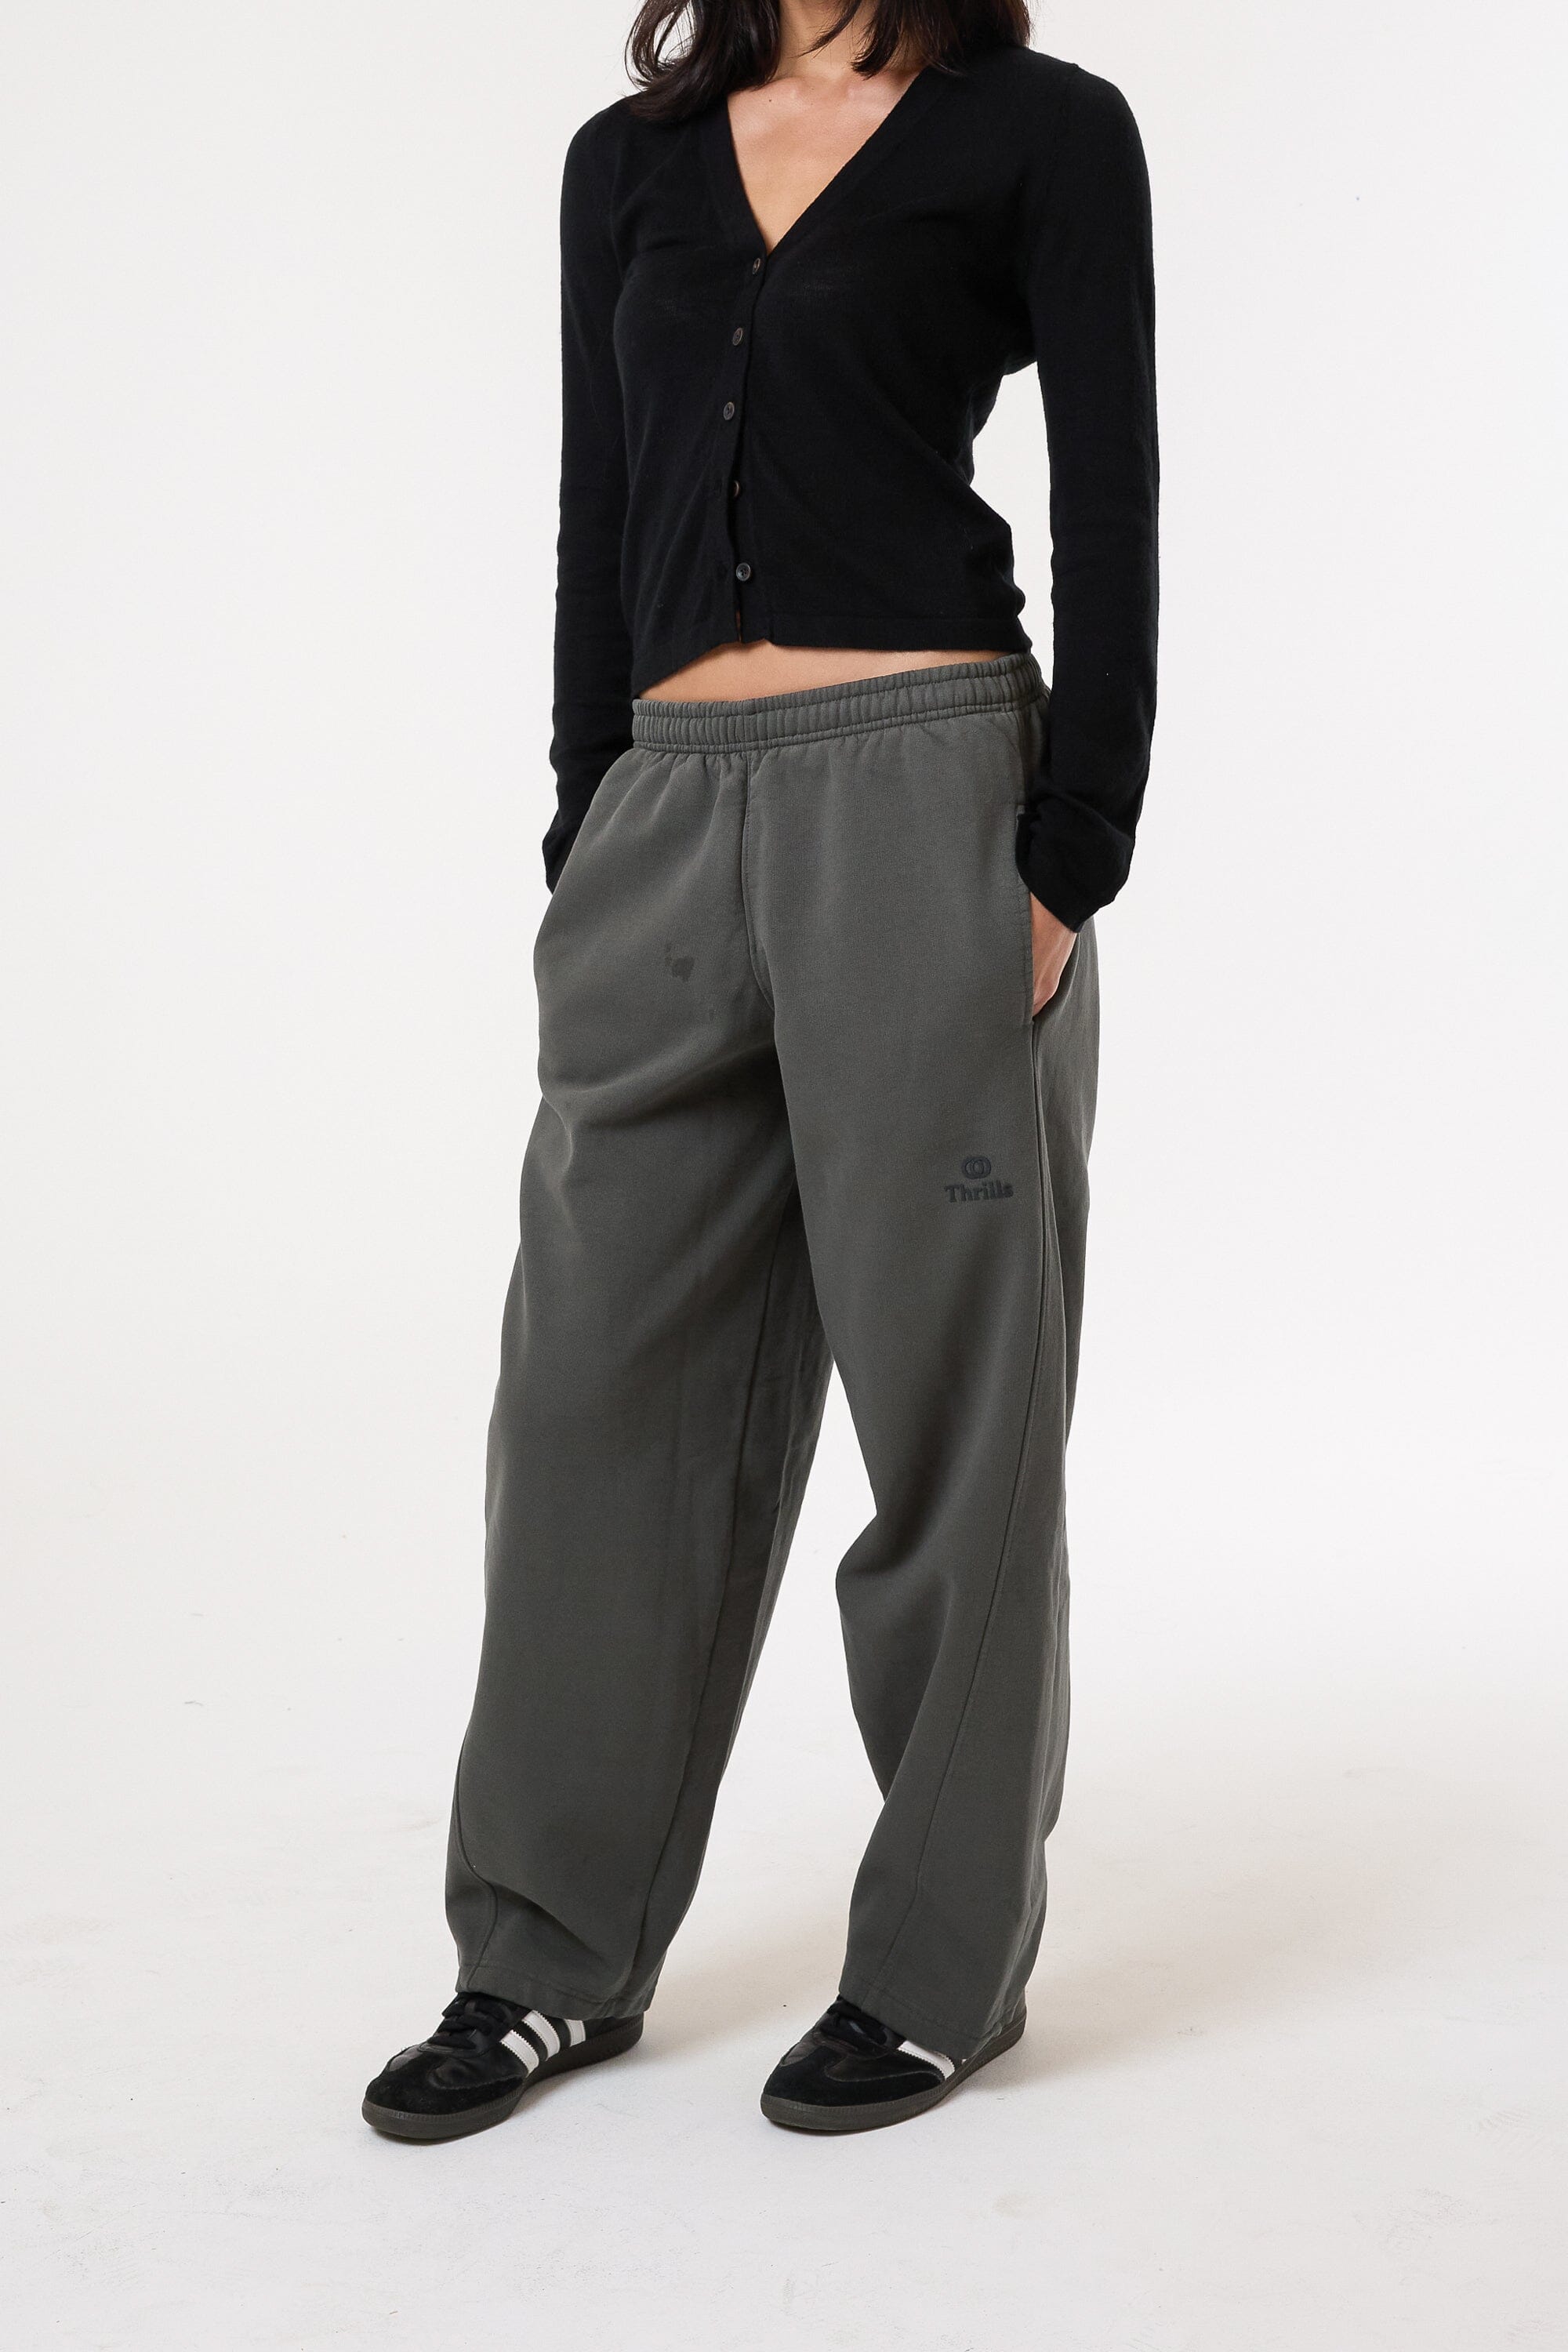 Arts and Industrial Track Pant - Merch Black